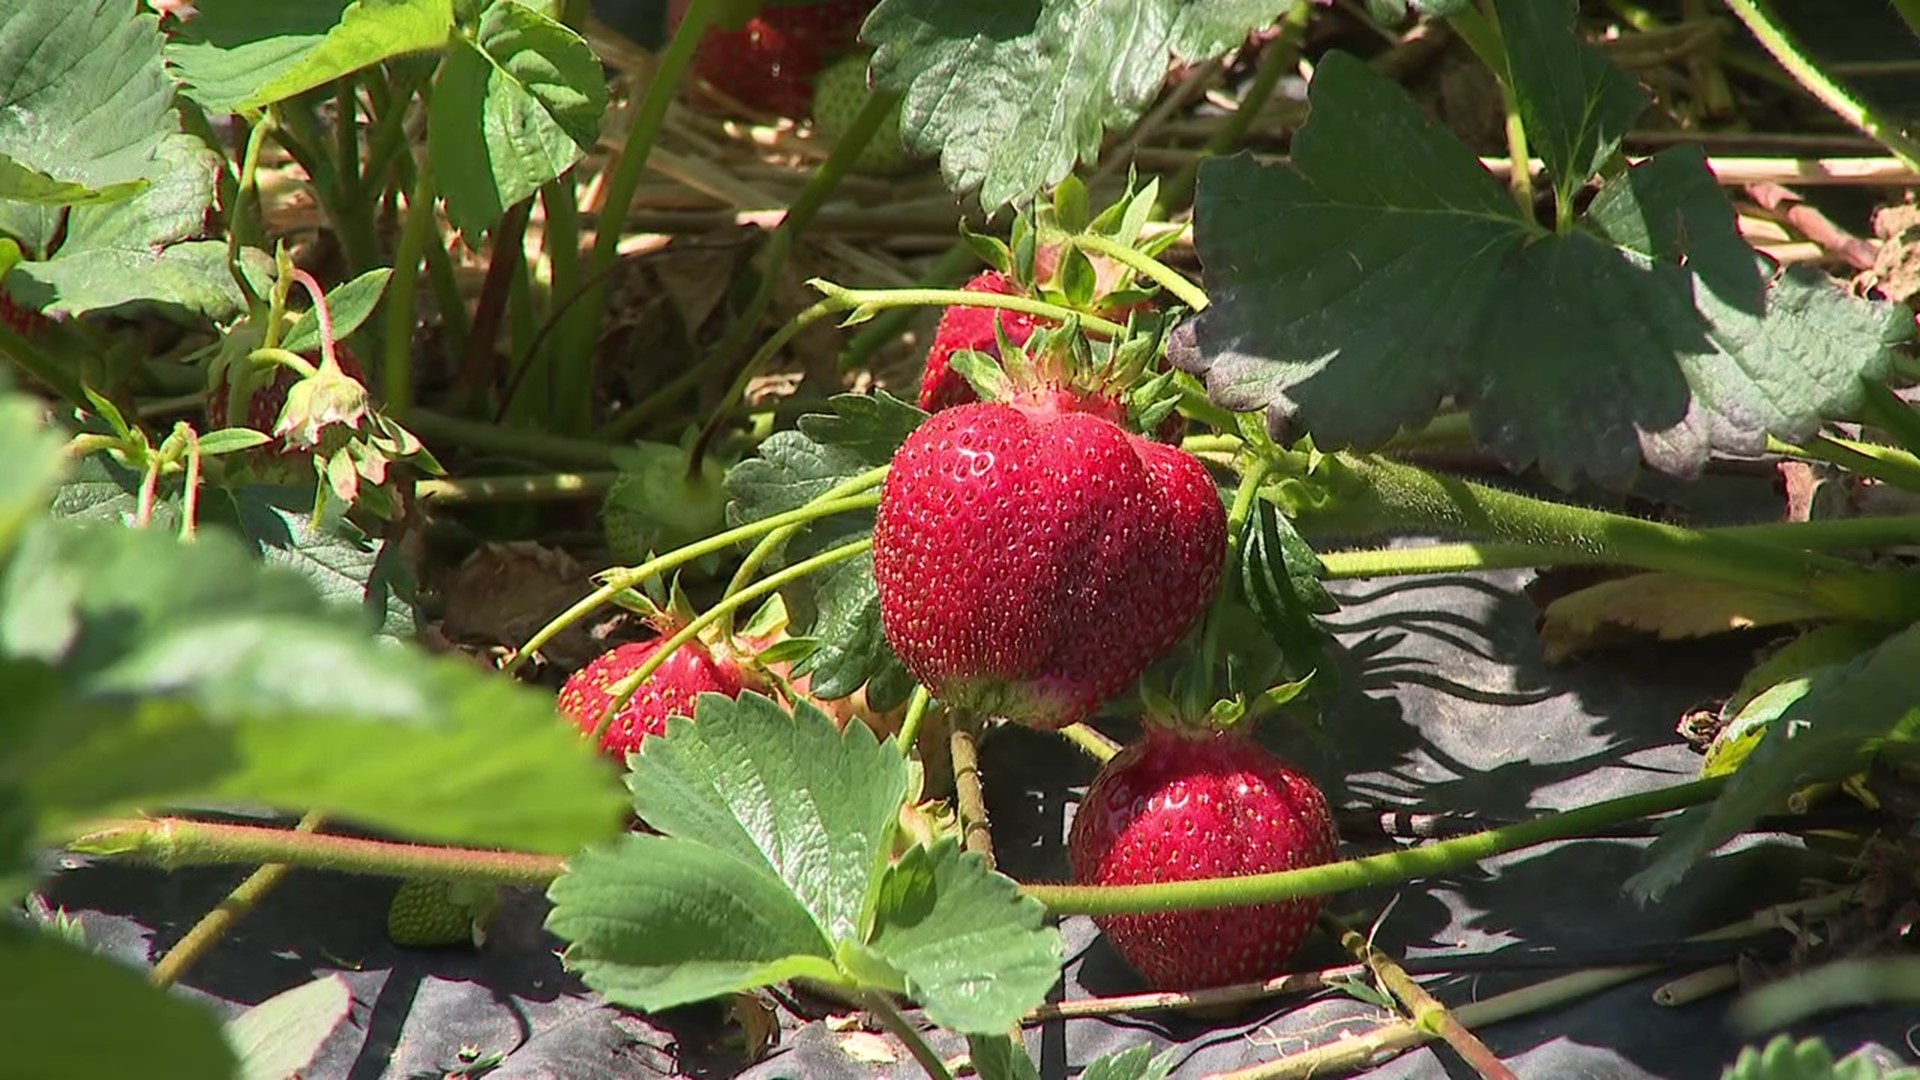 This month's late-season freeze damaged a lot of farmer's crops, including many strawberries.